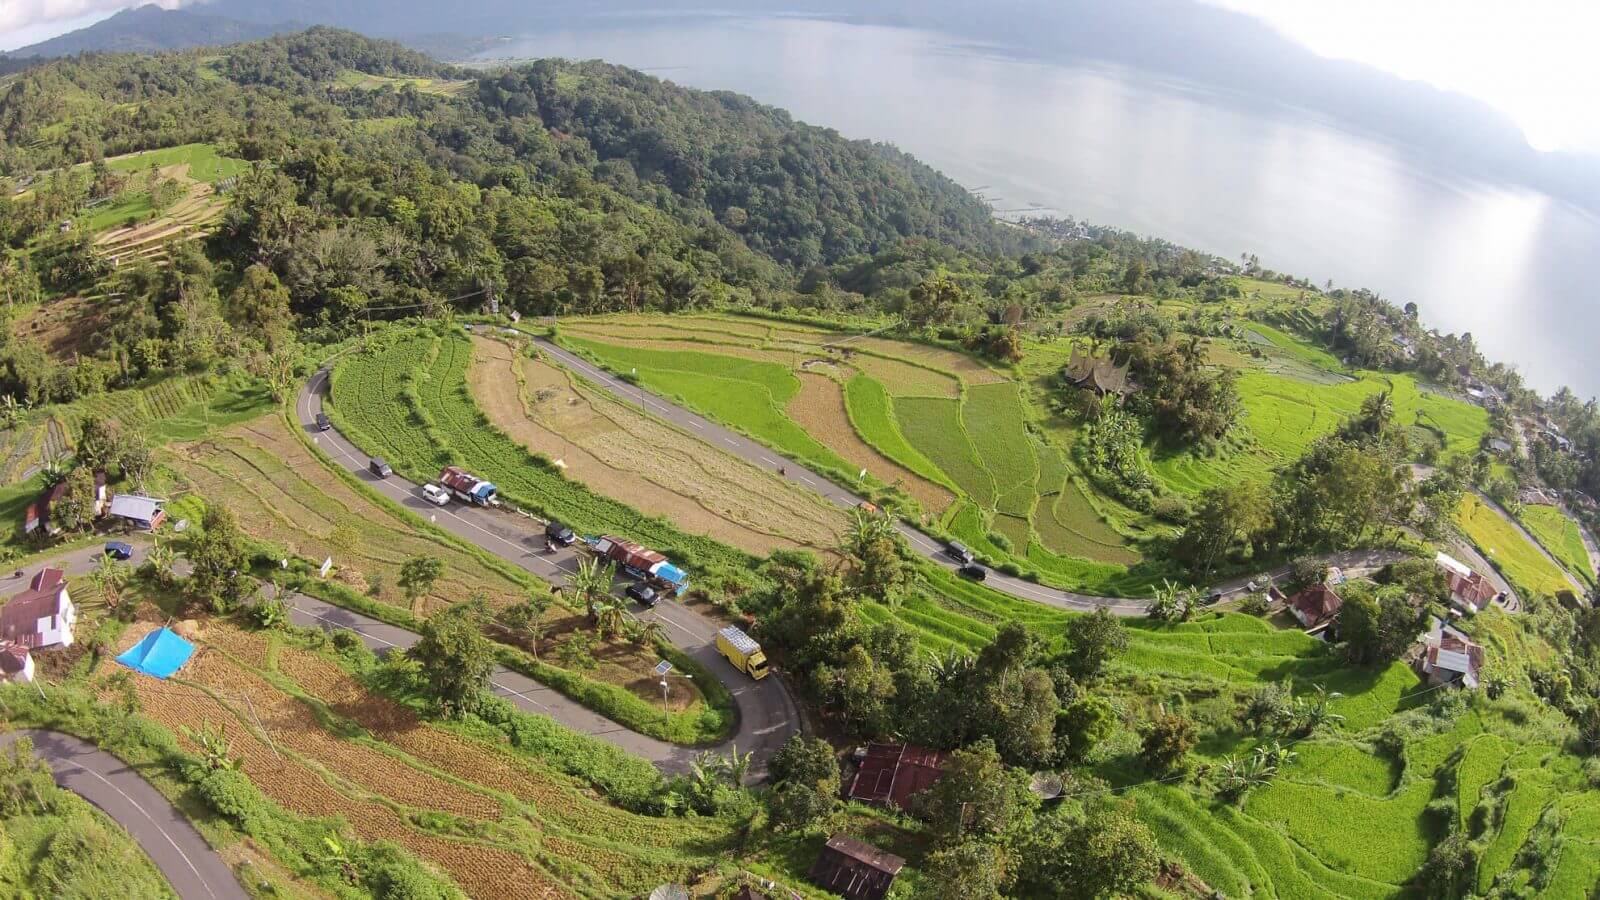 Image 5 Extreme Spots in Indonesia to Test Your Driving Skill